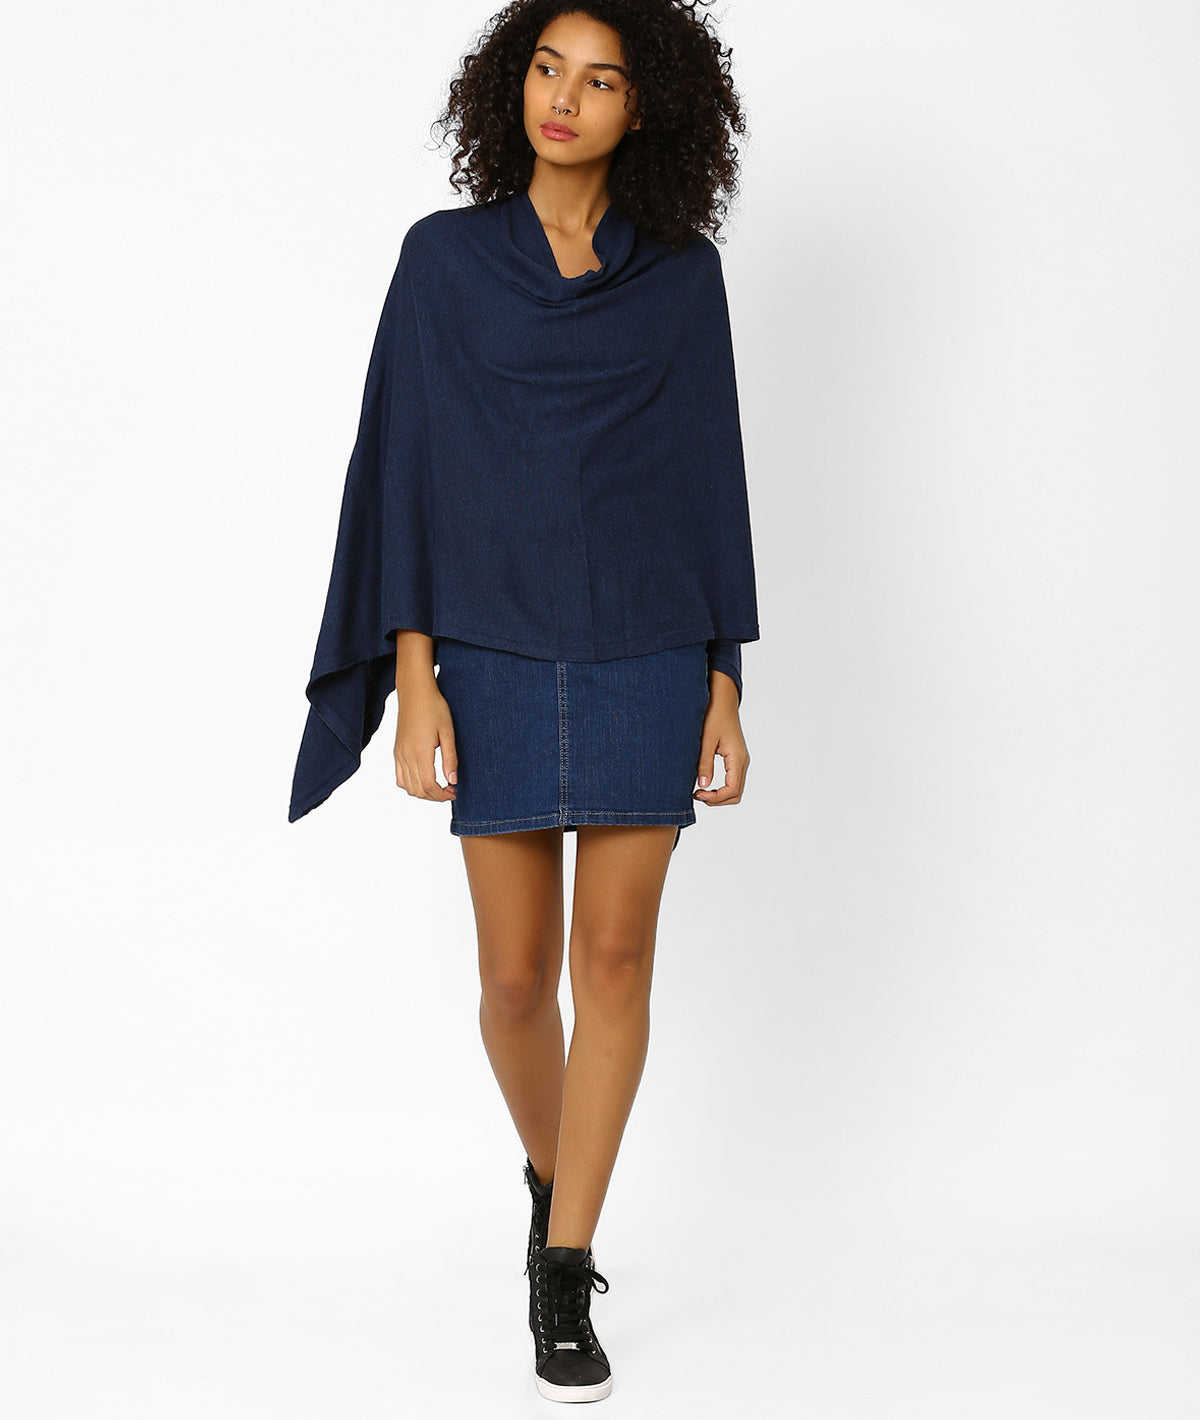 Rosette - Navy Cotton Knitted Fashion Poncho / Top / Cape